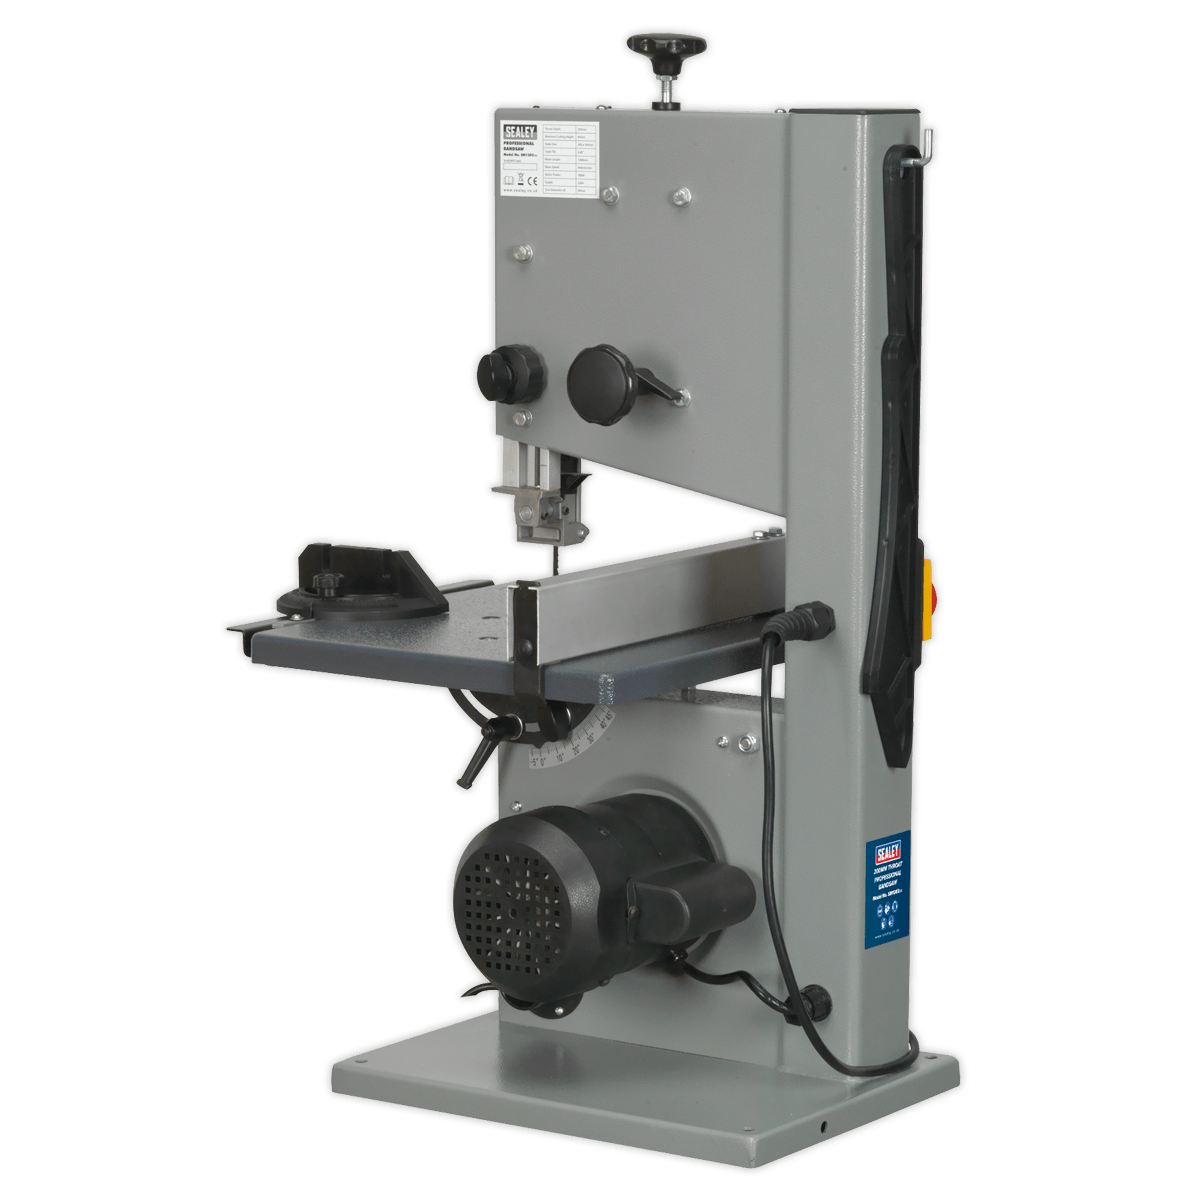 Professional Bandsaw 200mm | Steel chassis with locking blade wheel covers. | toolforce.ie